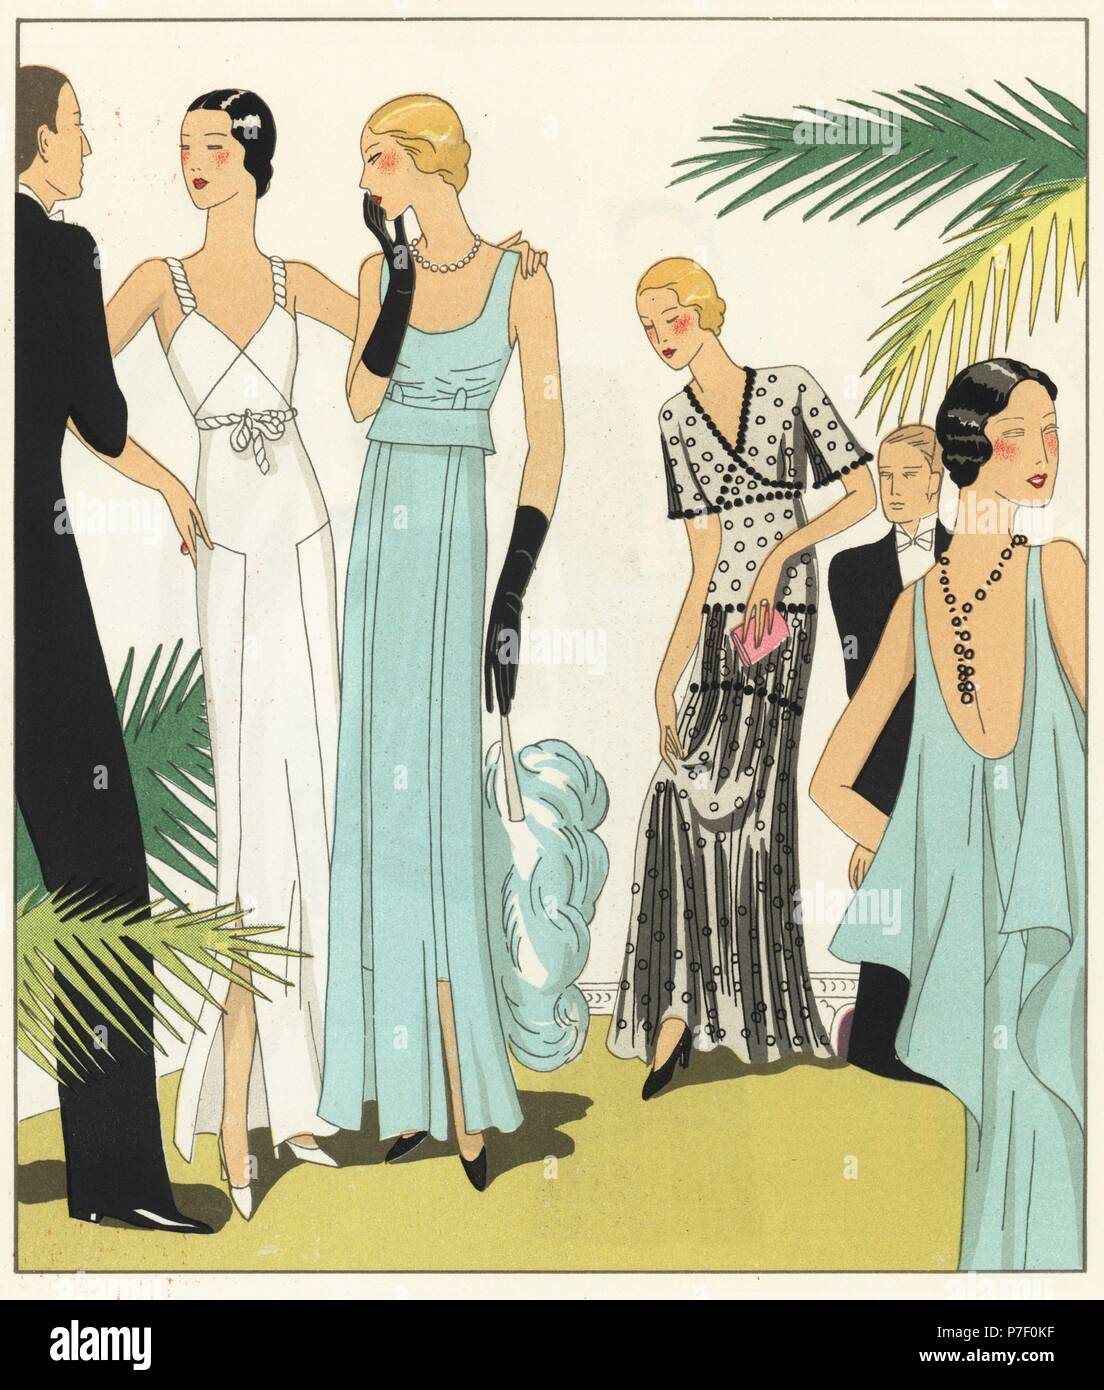 Woman in white satin crepe evening gown, woman in blue crepe georgette evening dress, and woman in tulle dress with velvet pastilles. Men in tuxedos. Handcolored pochoir (stencil) lithograph from the French luxury fashion magazine Art, Gout, Beaute, 1931. Stock Photo